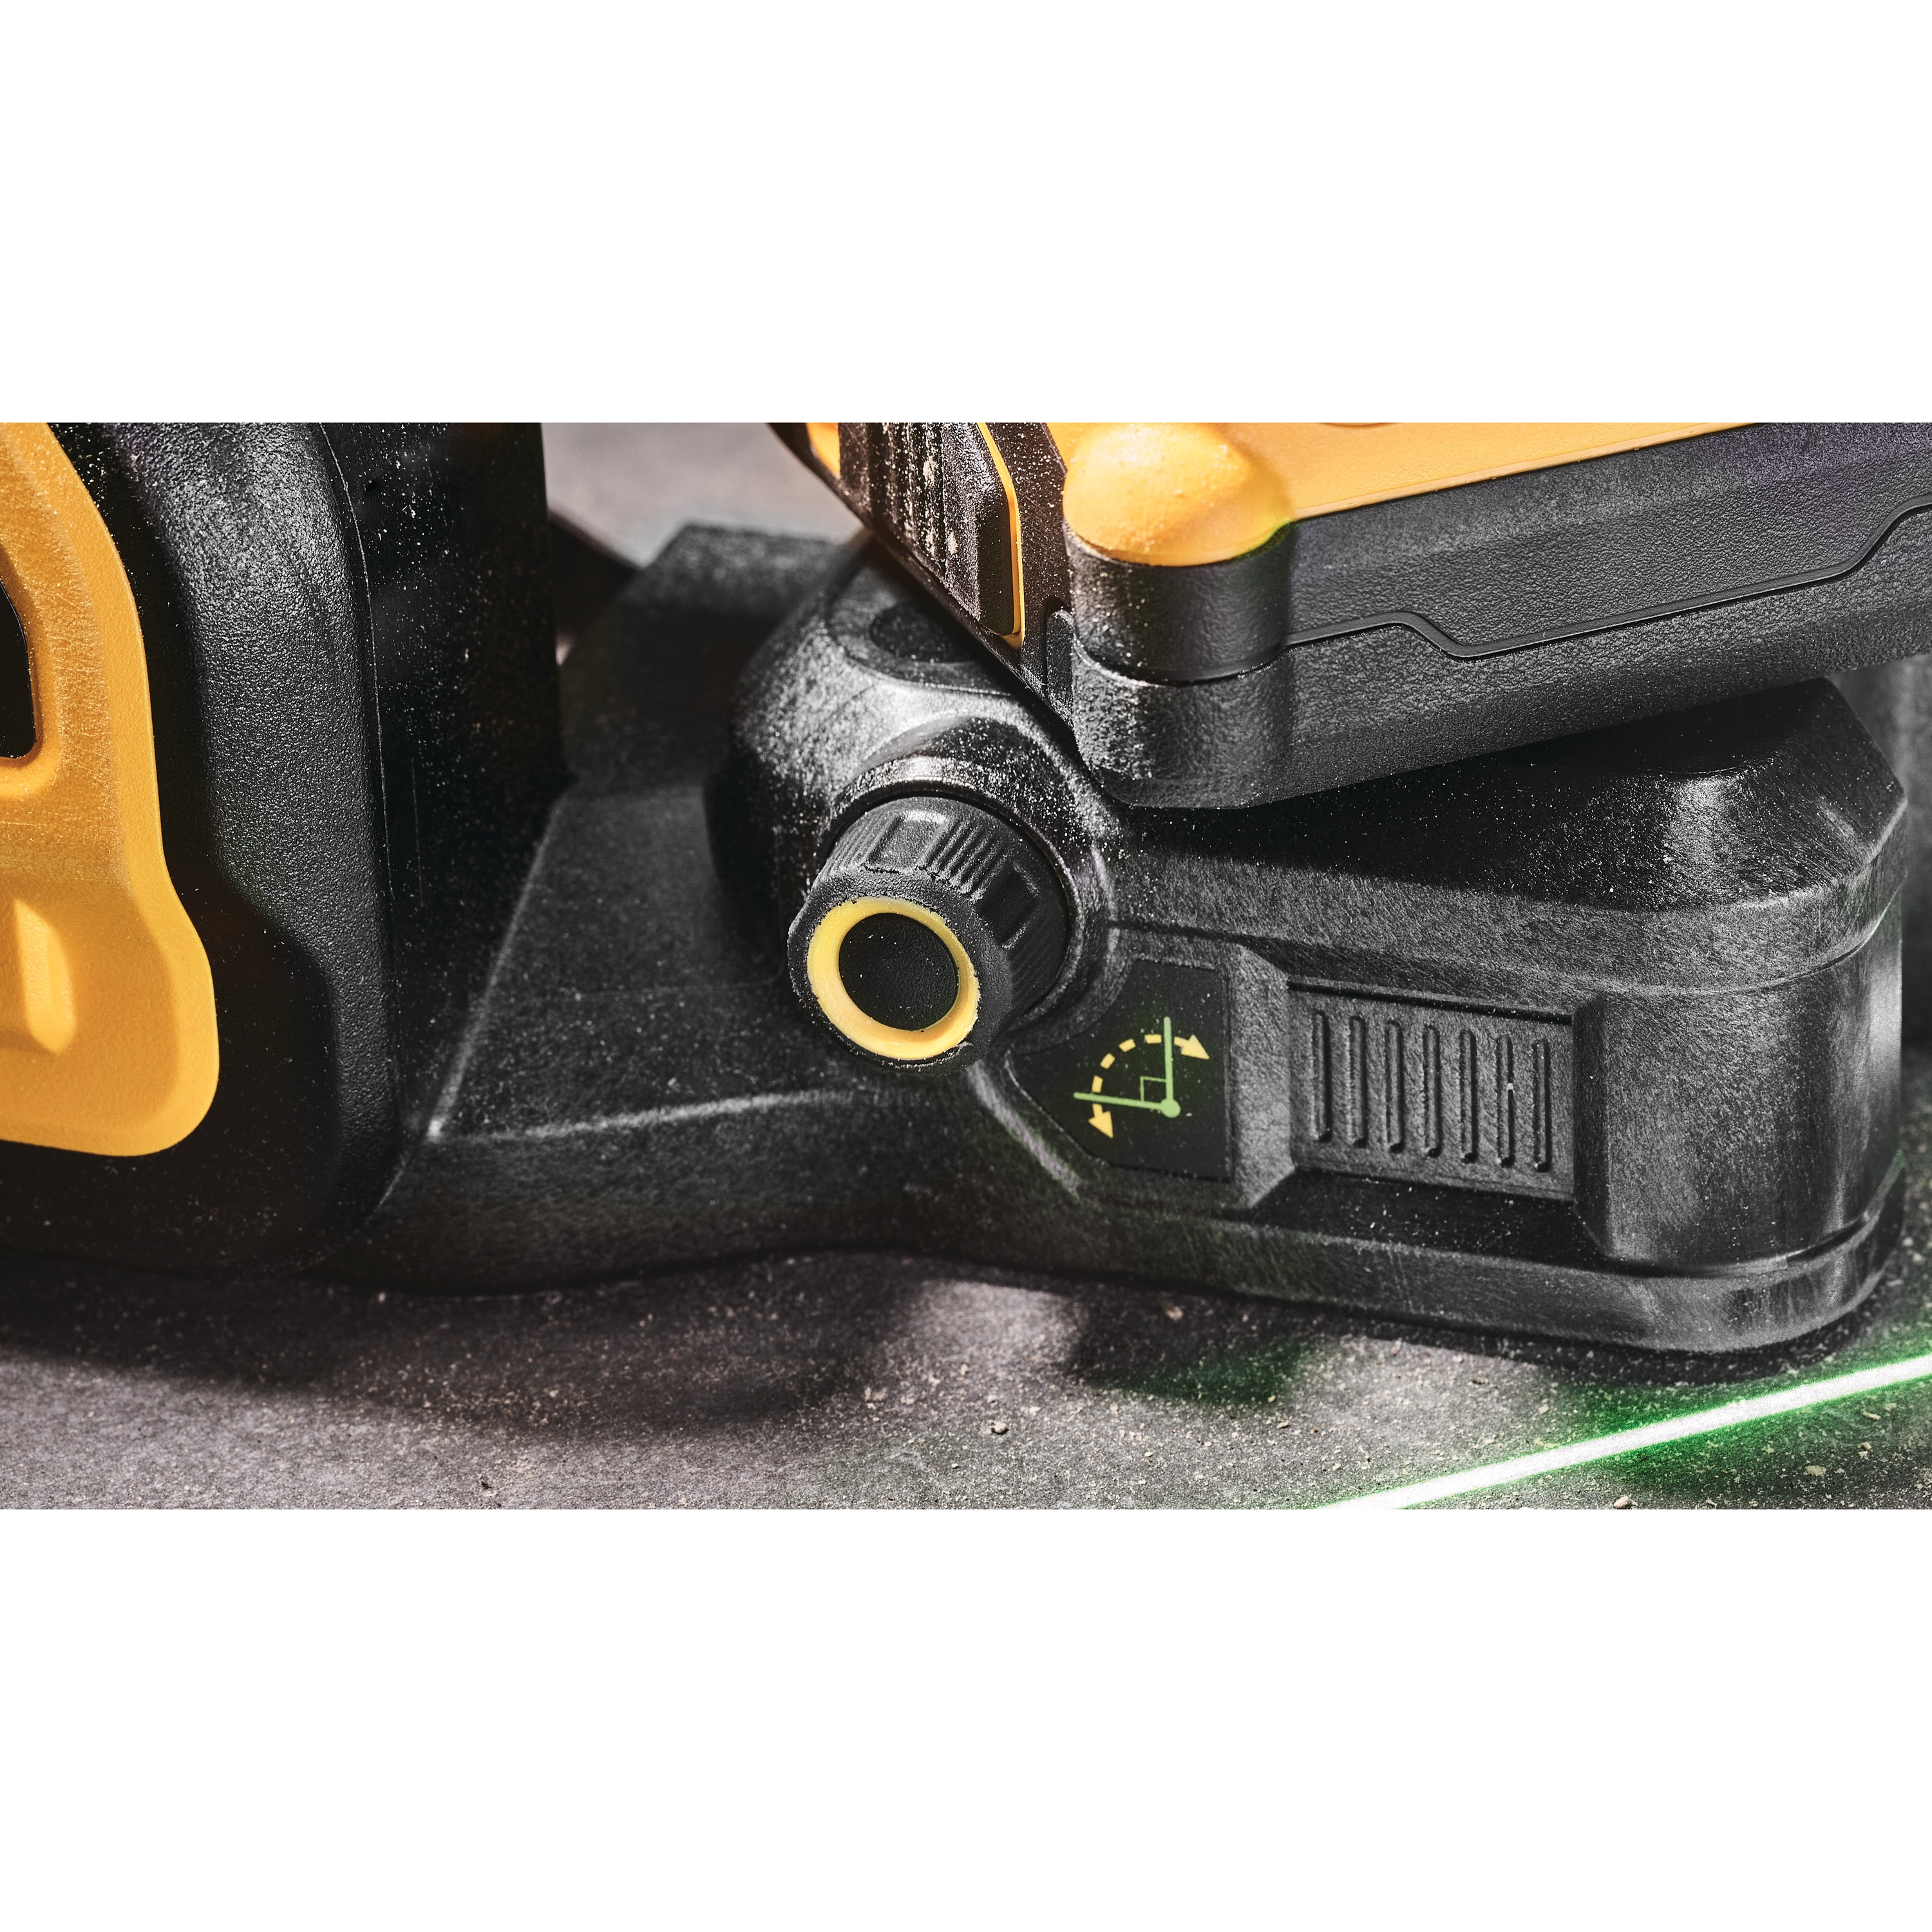 Adjustment knob feature of a green line laser